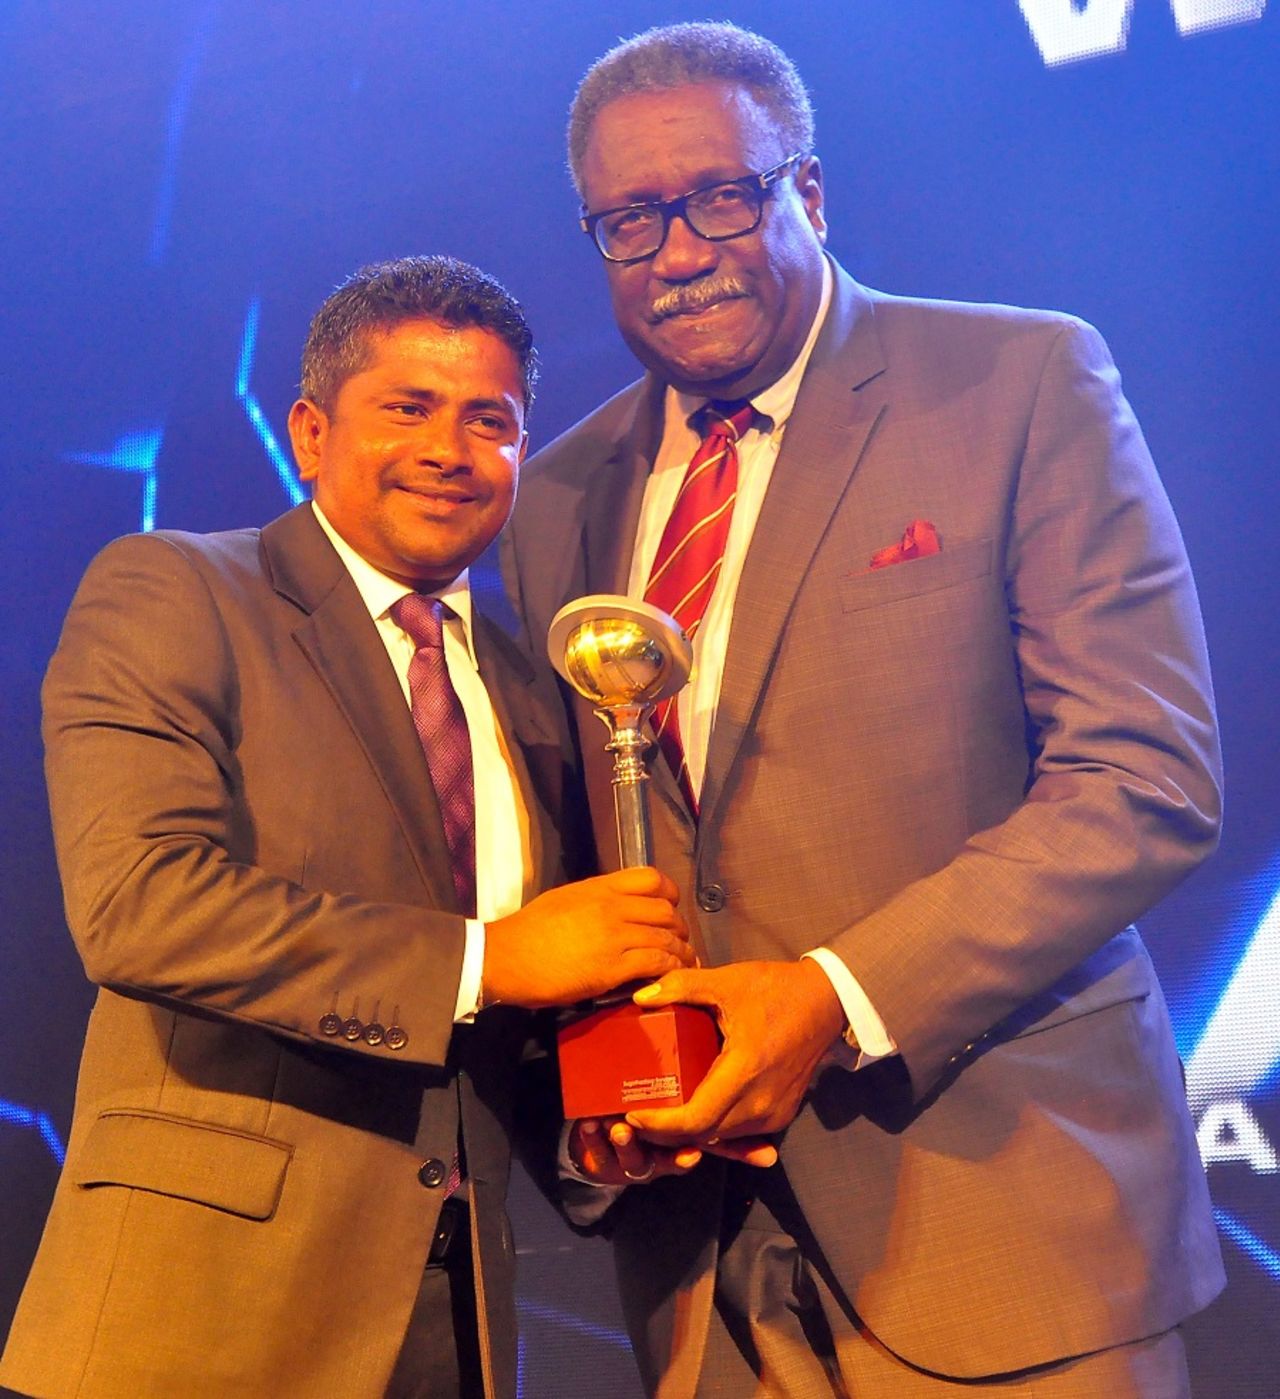 Rangana Herath was named Test bowler of the year at the SLC awards, Colombo, October 19, 2015